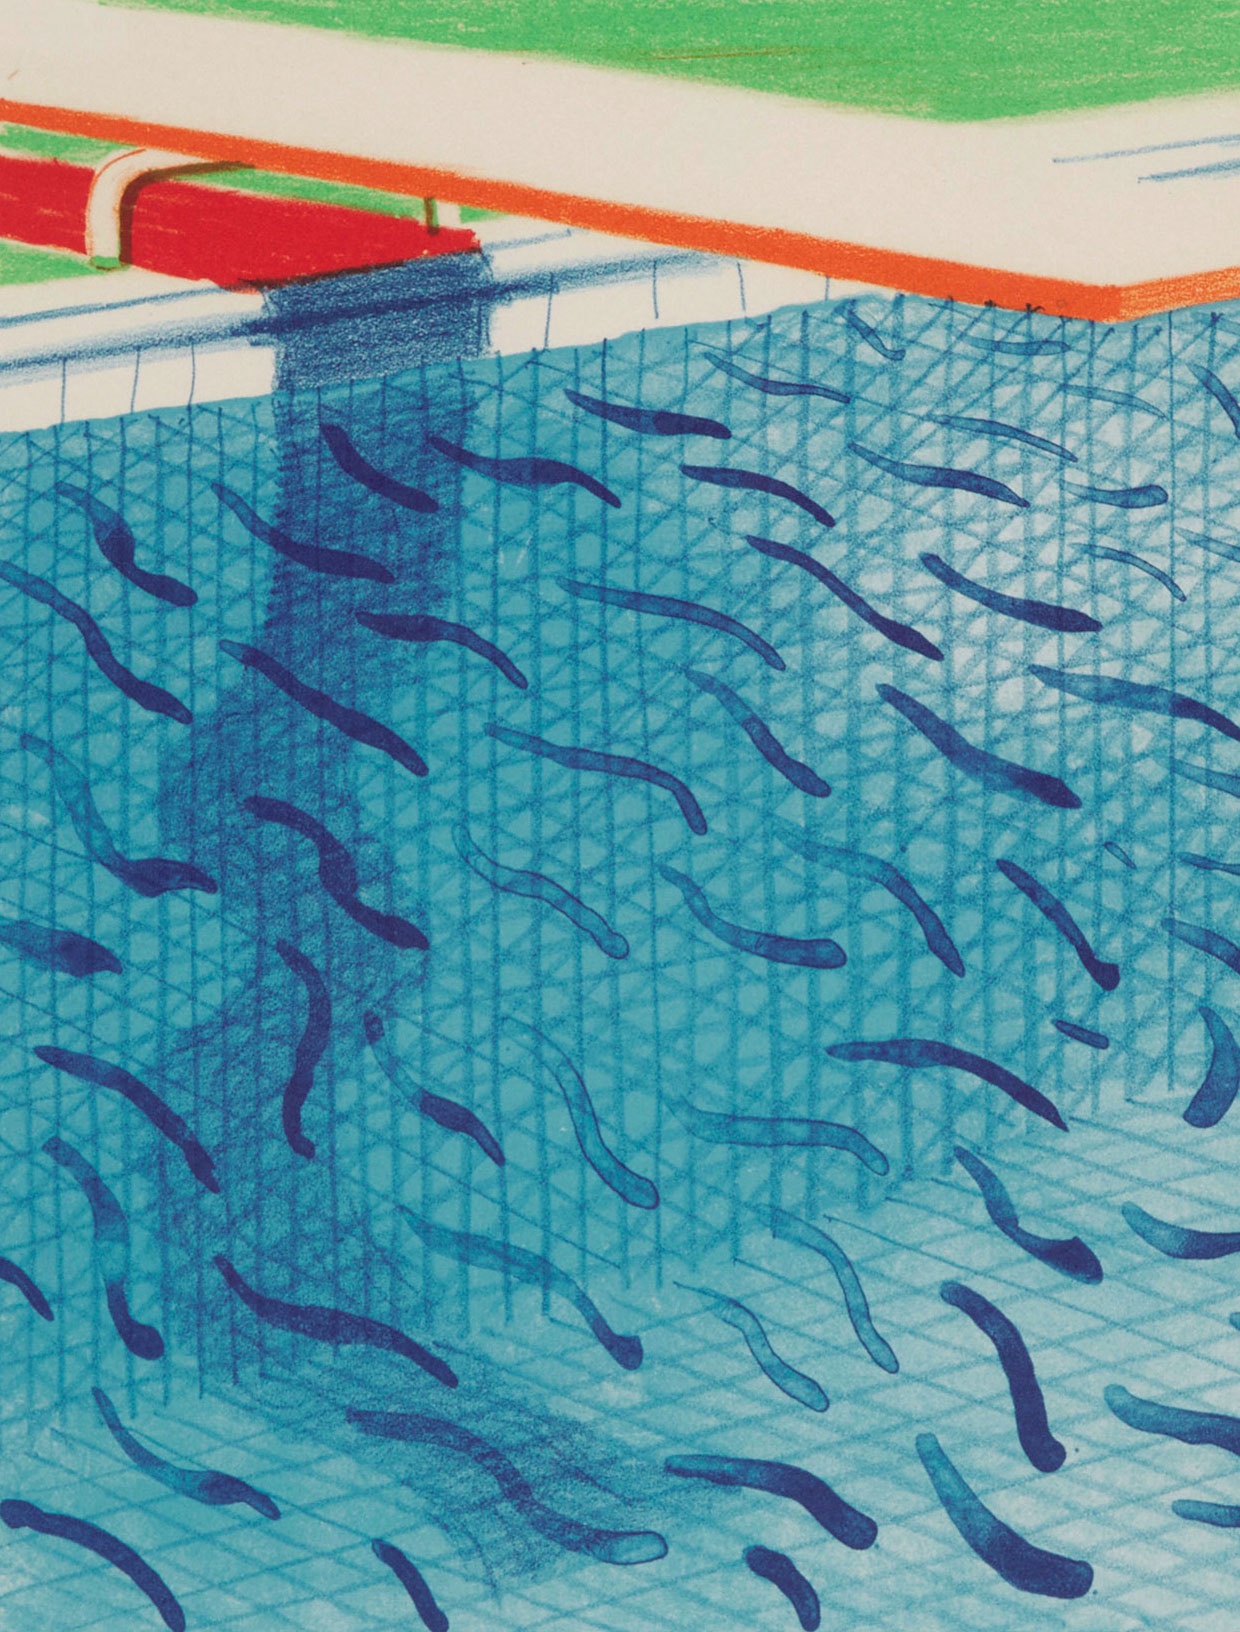 Diving in to David Hockney’s Swimming Pools